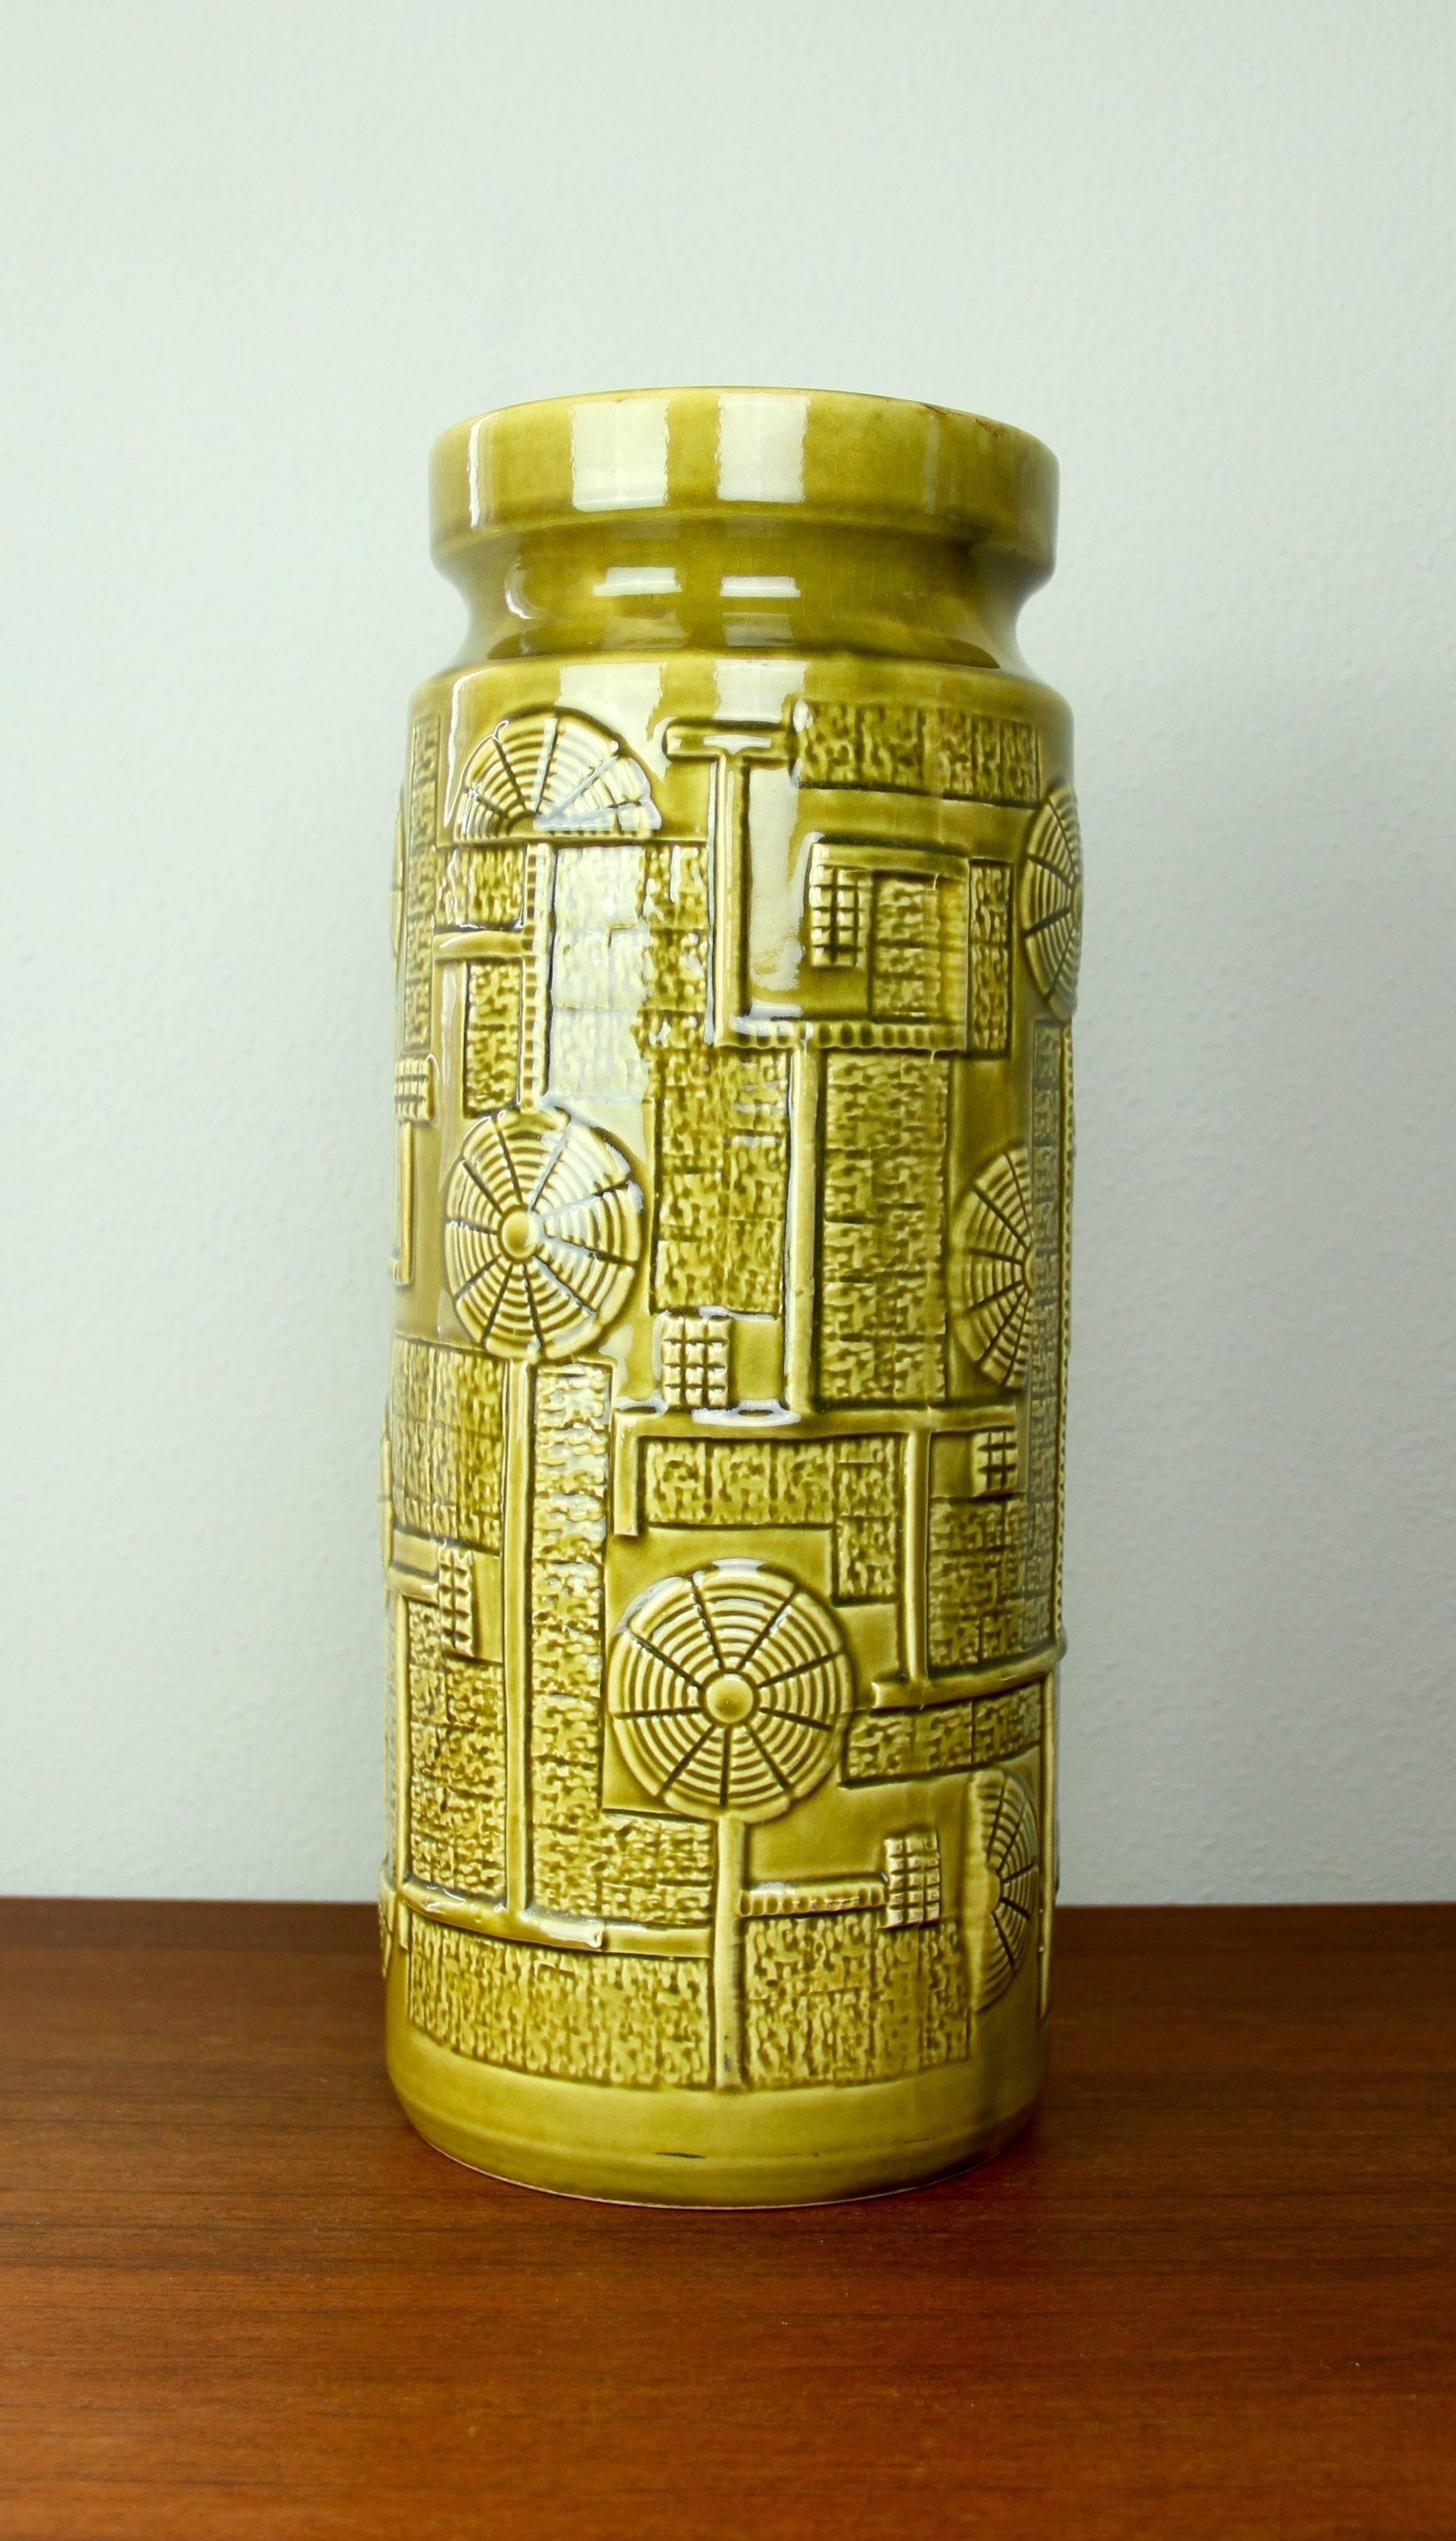 Beautiful tall vase from the 'Narvik' range designed by Bodo Mans and produced by Bay Keramik in the early to mid-1970s. The Futuristic relief pattern, captured in a mustard yellow or green, looks somehow Aztec like whilst maintaining a feeling of